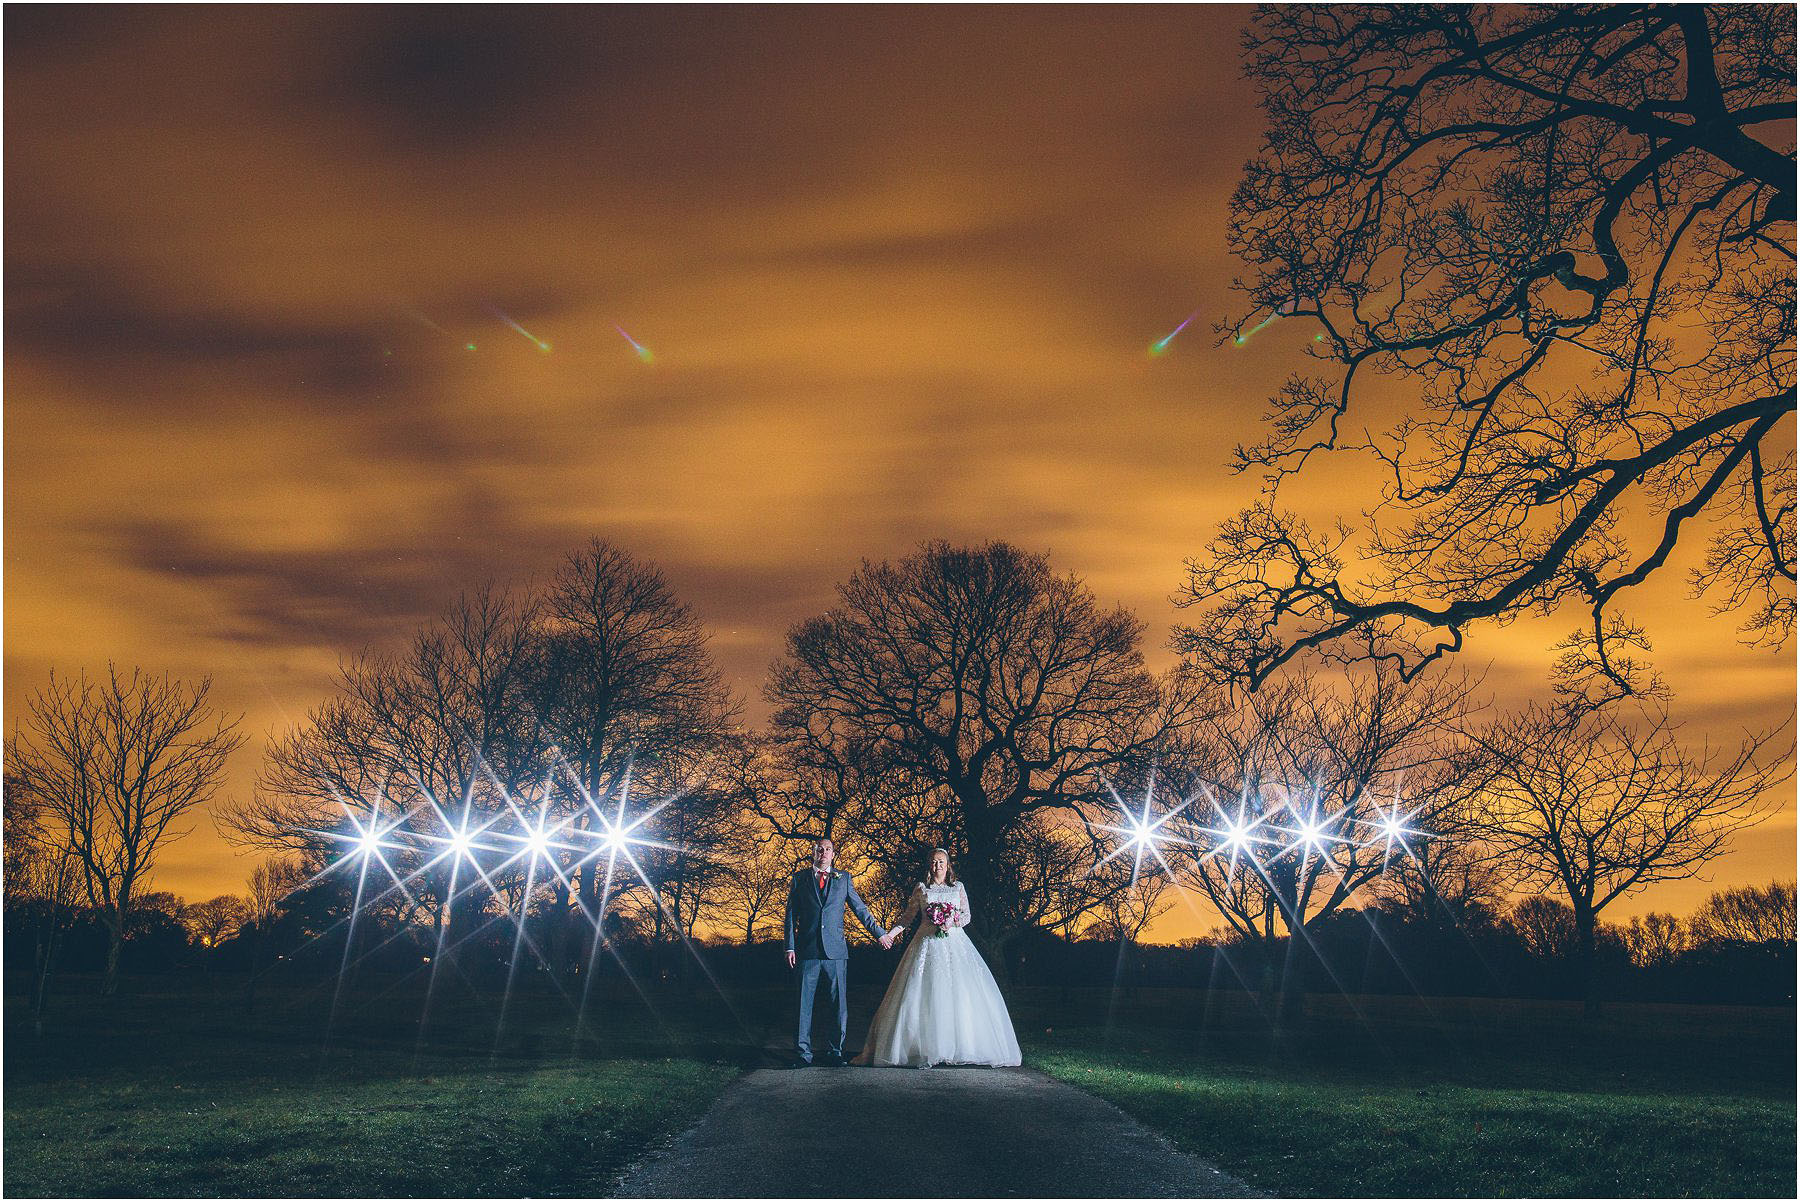 A night time wedding portrait with floodlights in the background taken at Mere Court in Manchester